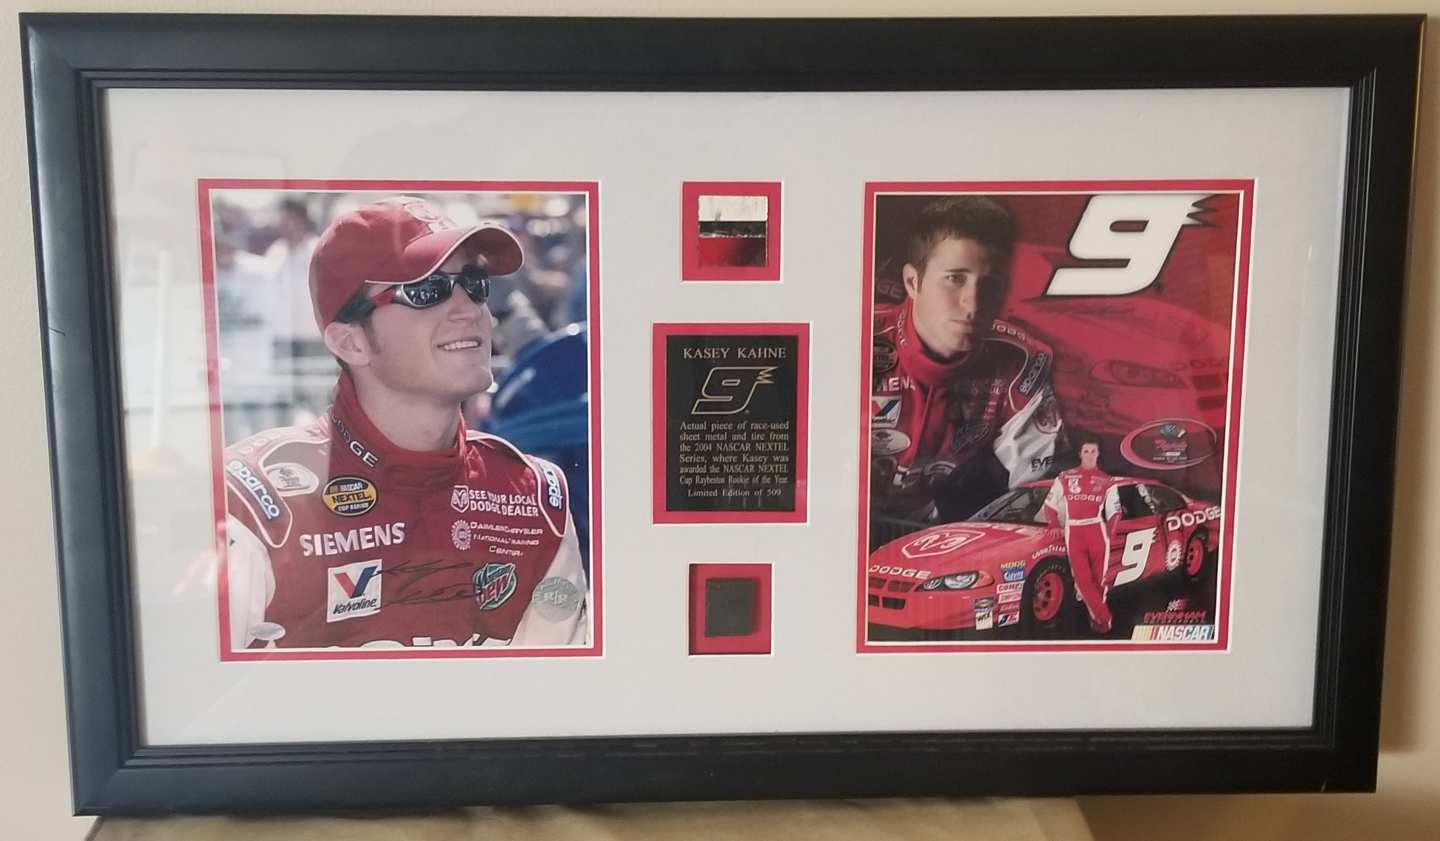 0th Image of a N/A KASEY KHANE SIGNED WALL COLLAGE